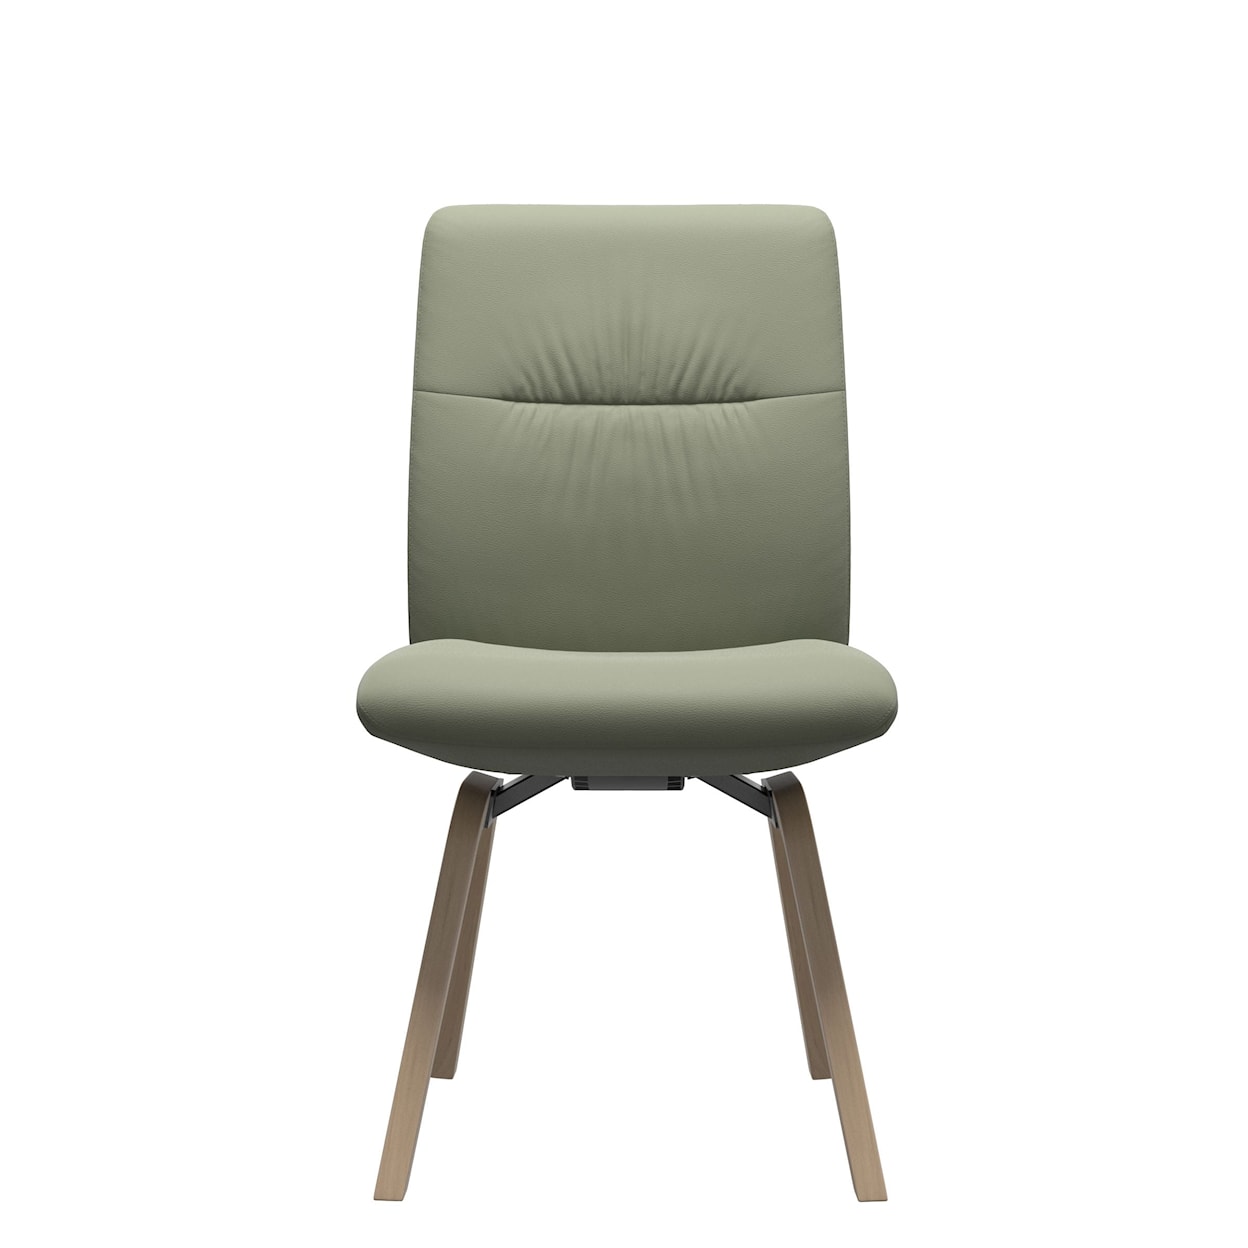 Stressless by Ekornes Stressless Mint Mint Large Low-Back Dining Chair D200